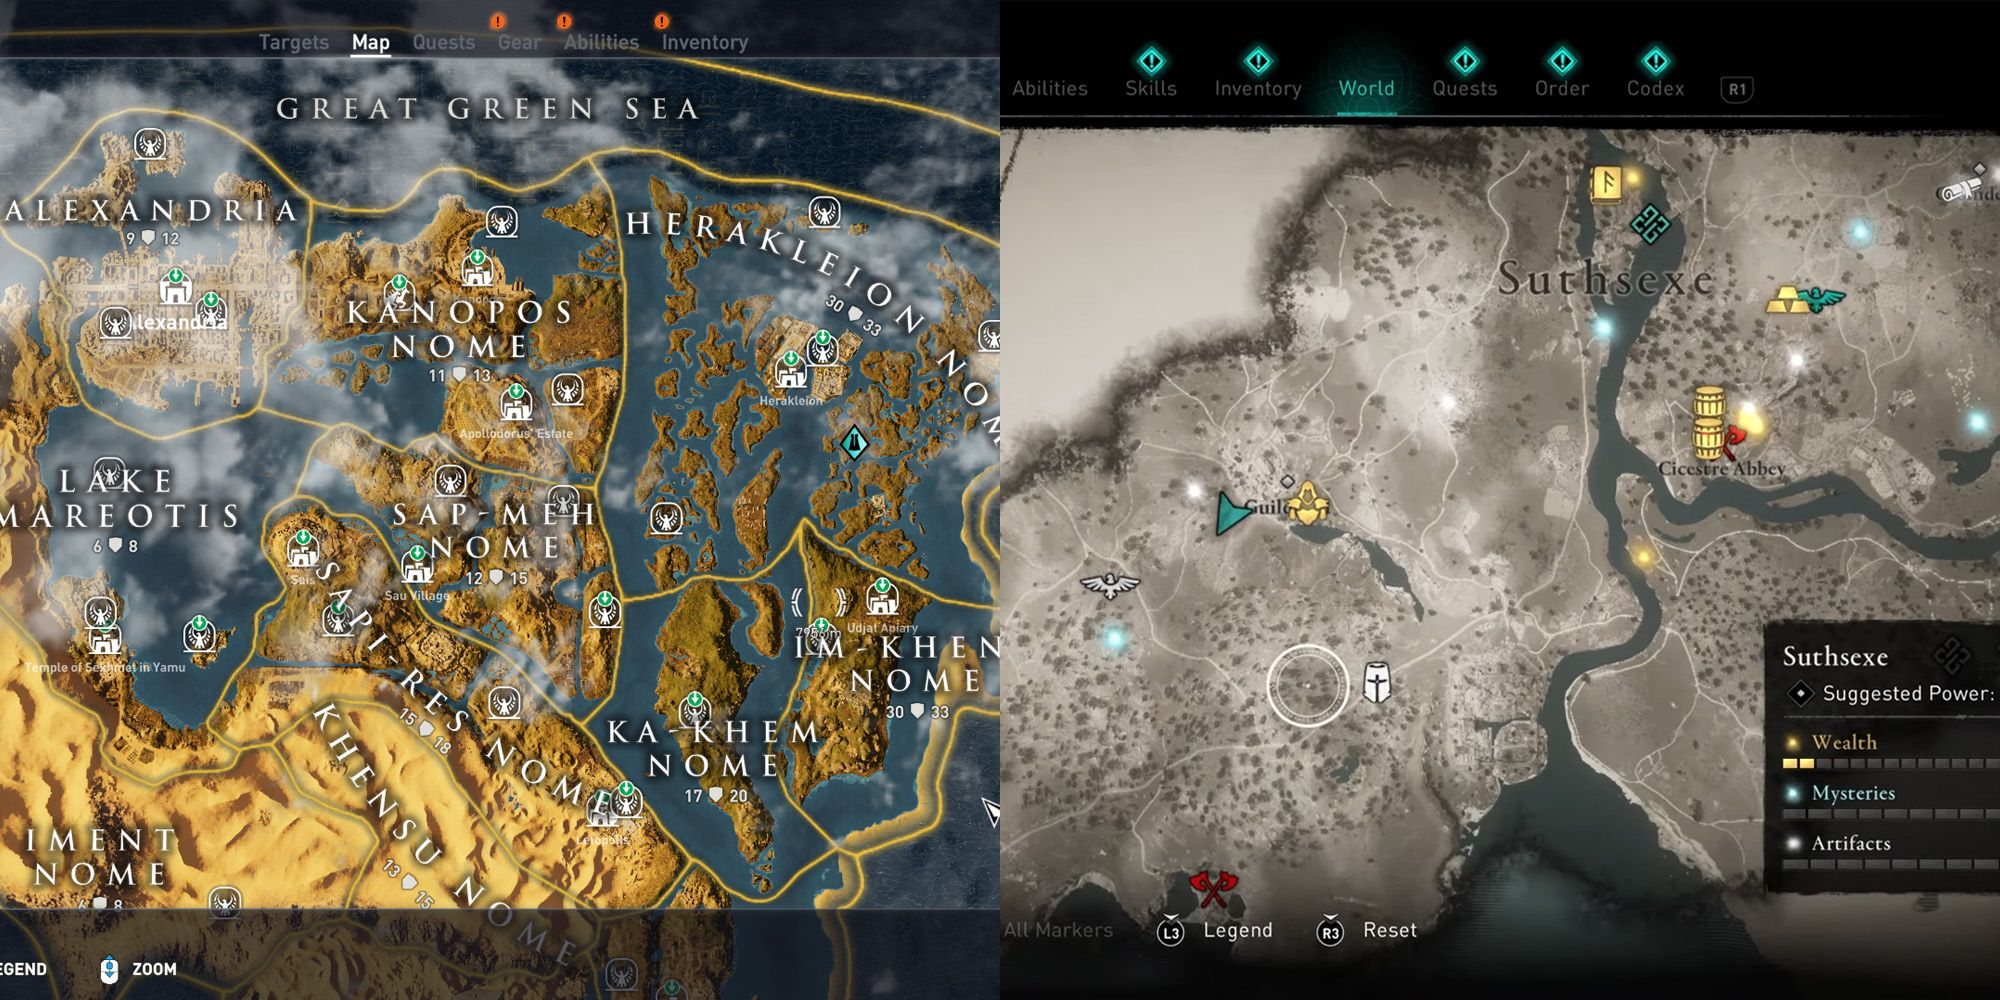 A split image with Assassin's Creed Origins' world map on the left, and Valhalla's on the right.